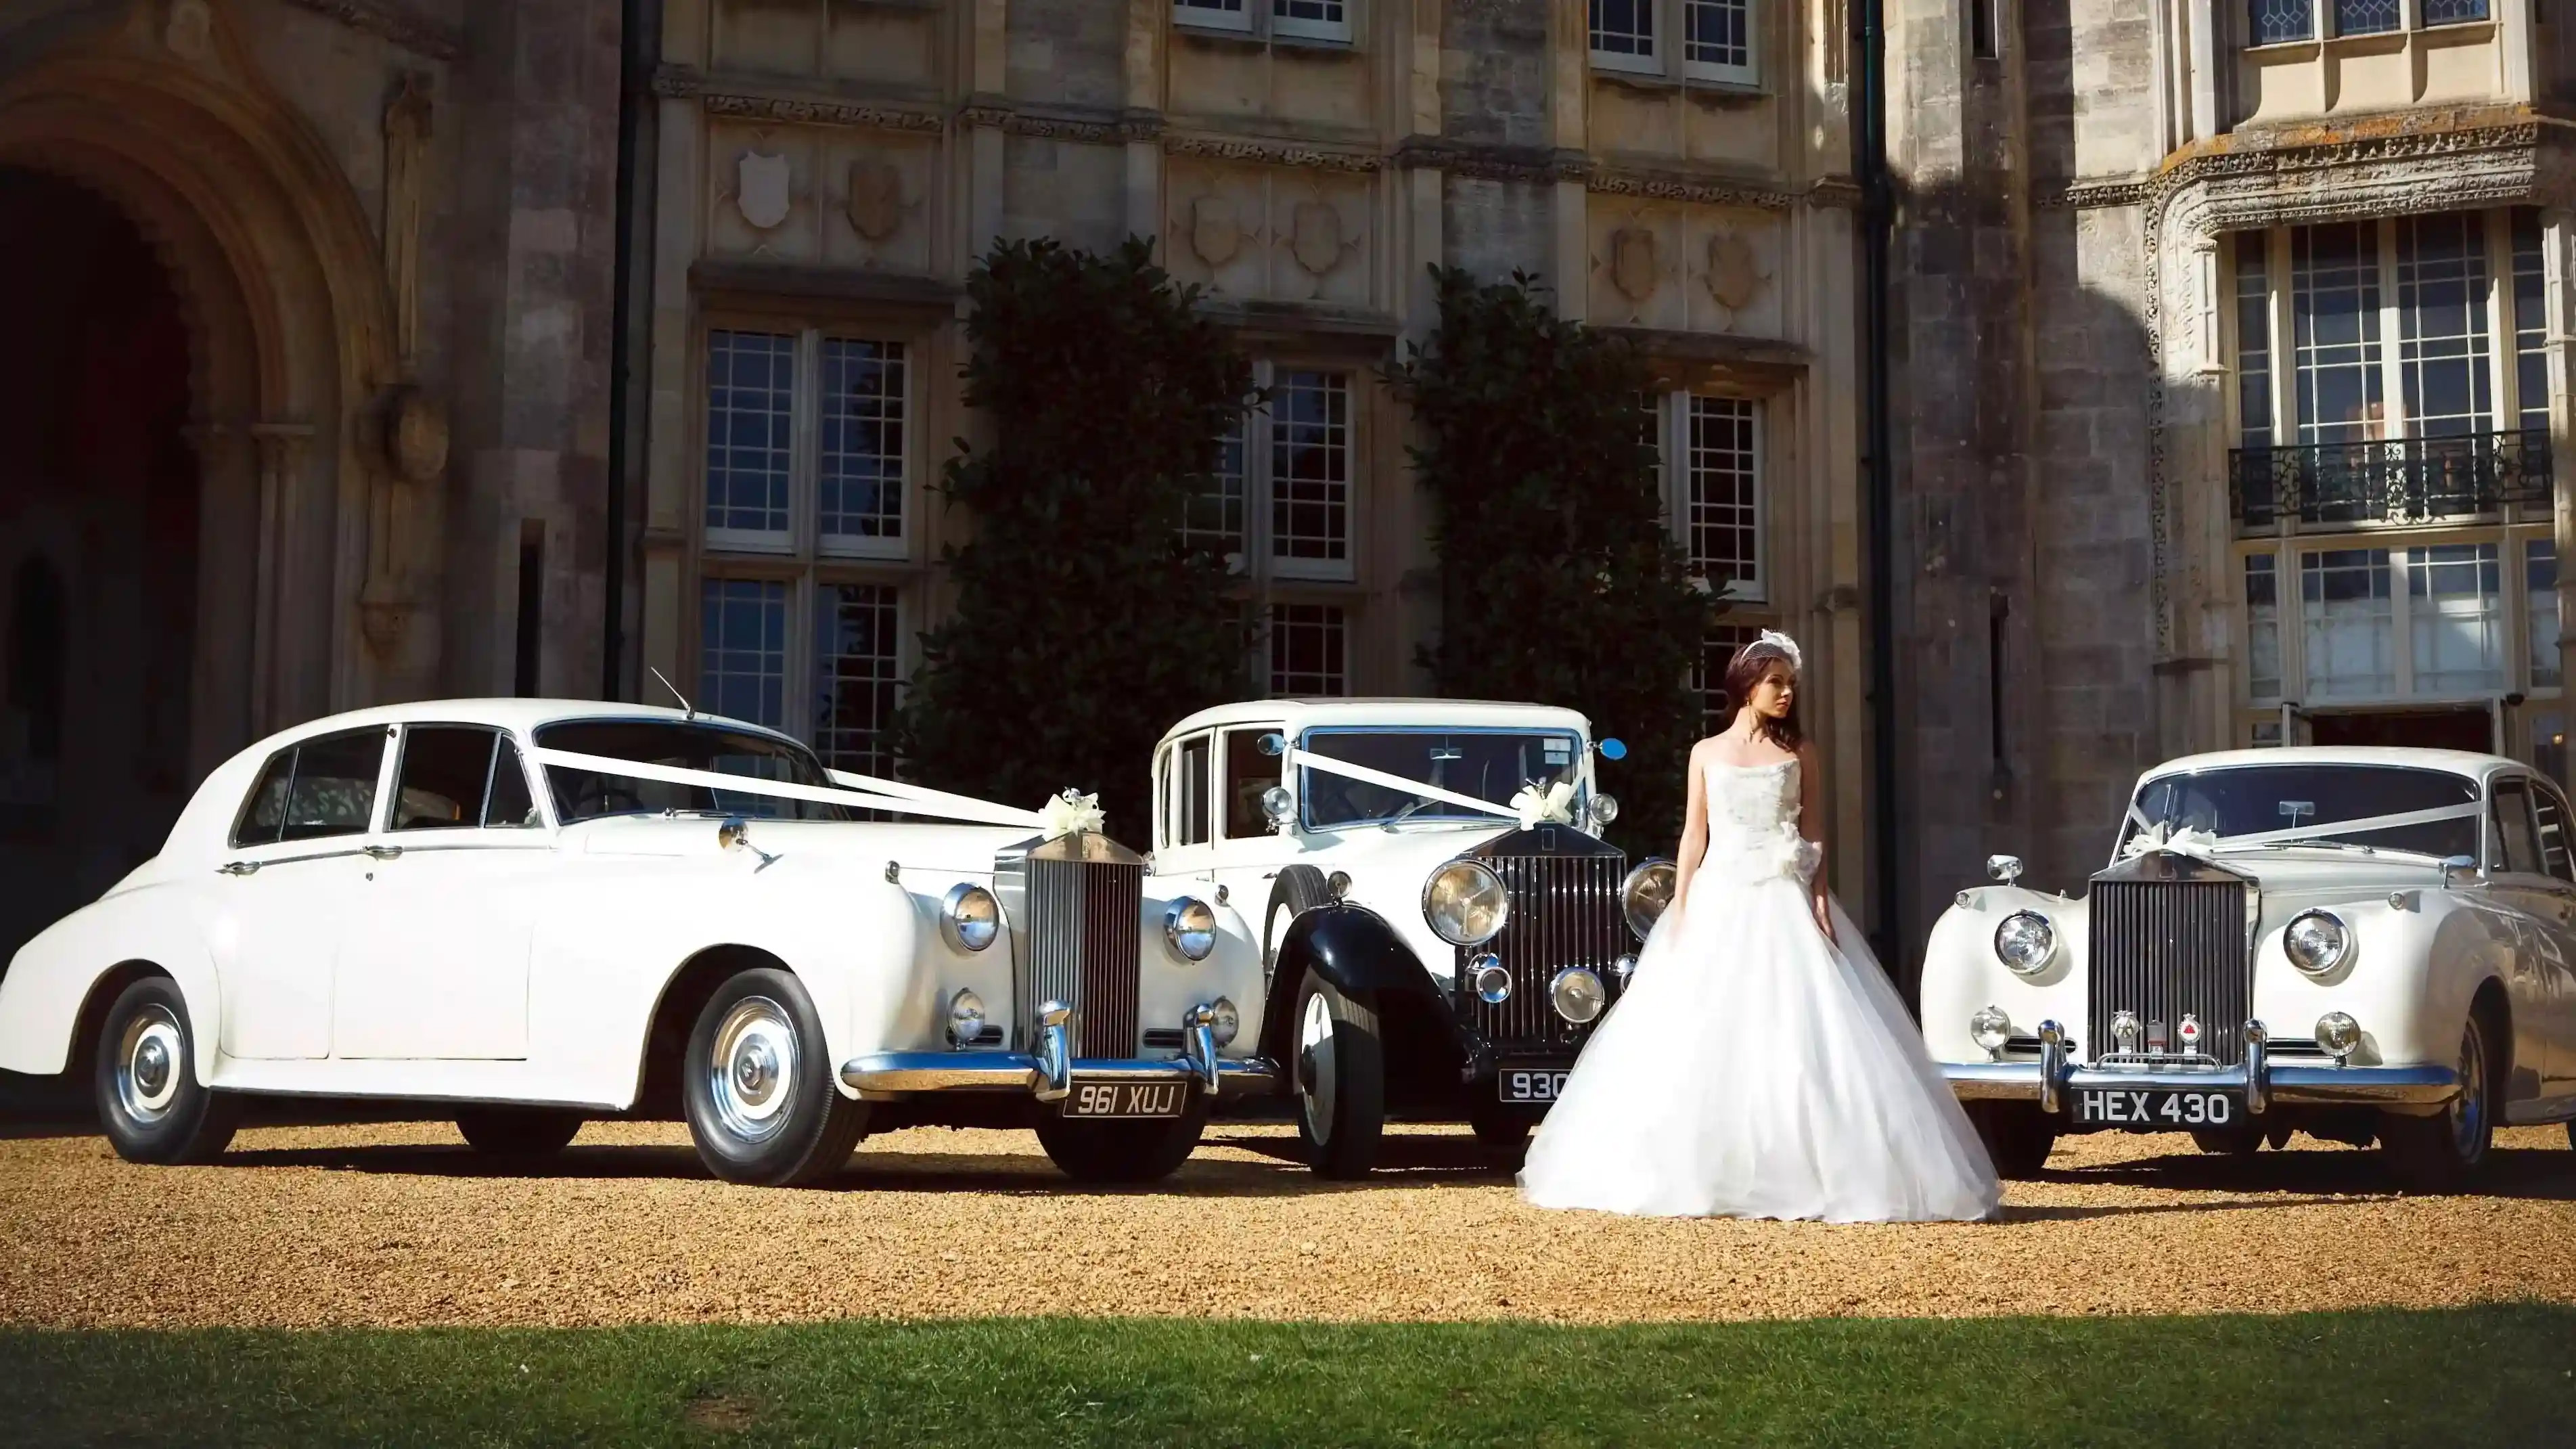 Selection of three classic and Vintage Rolls-Royce in White with Bride wearing a white wedding dress standing in the middle of the vehicles. Background is a popular wedding venue in the style of a castle in South Yorkshire.